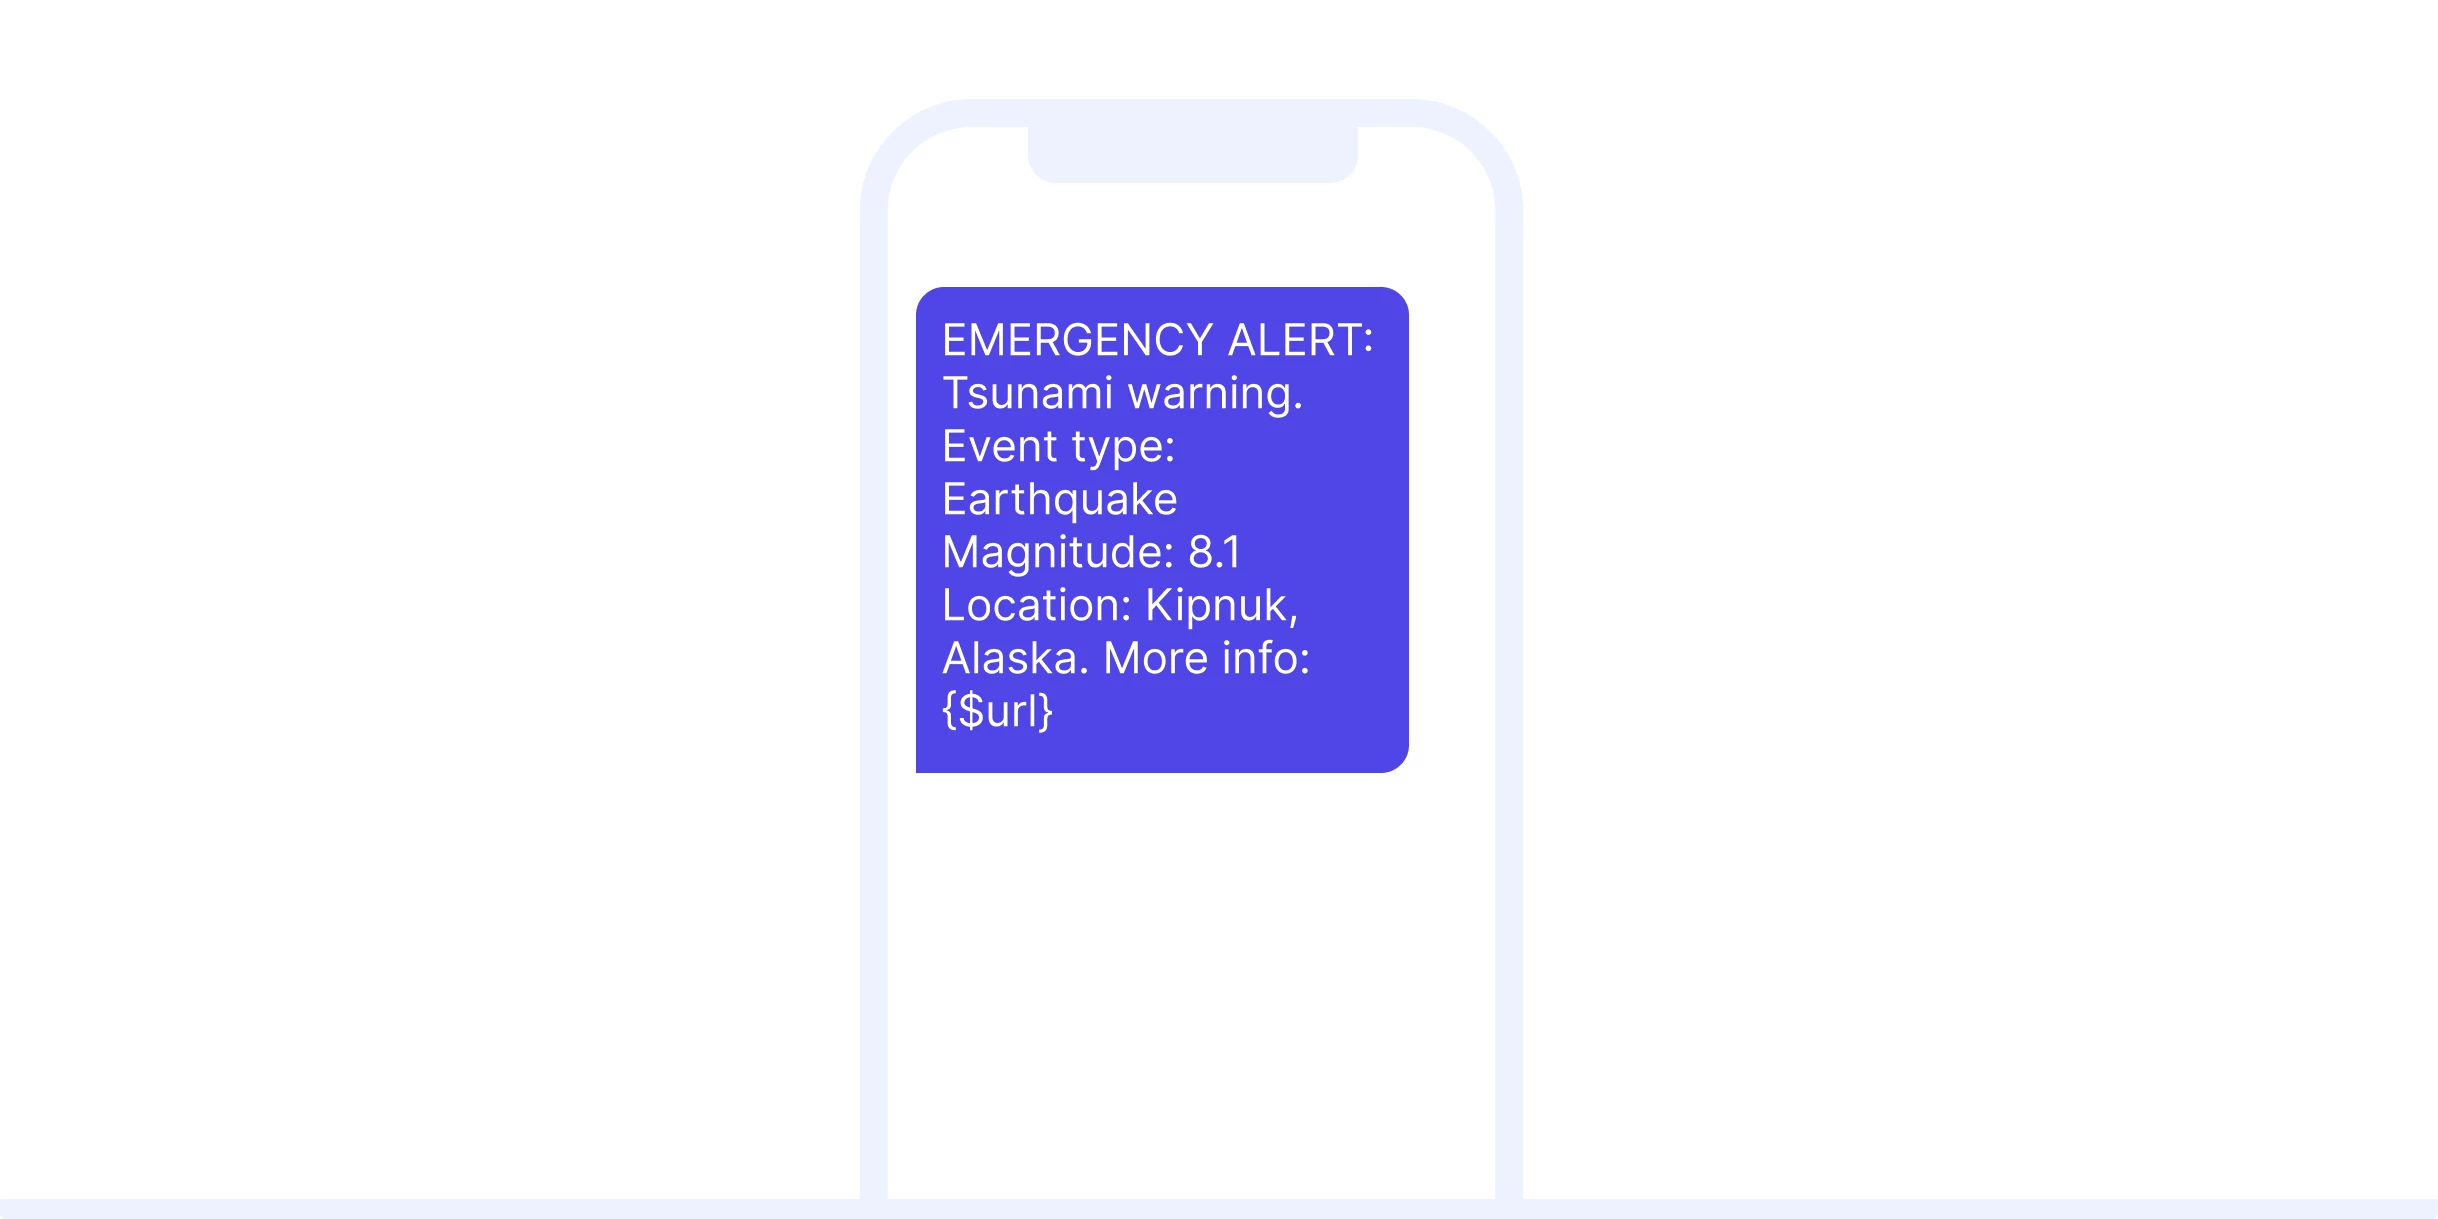 Transactional SMS example an emergency alert.